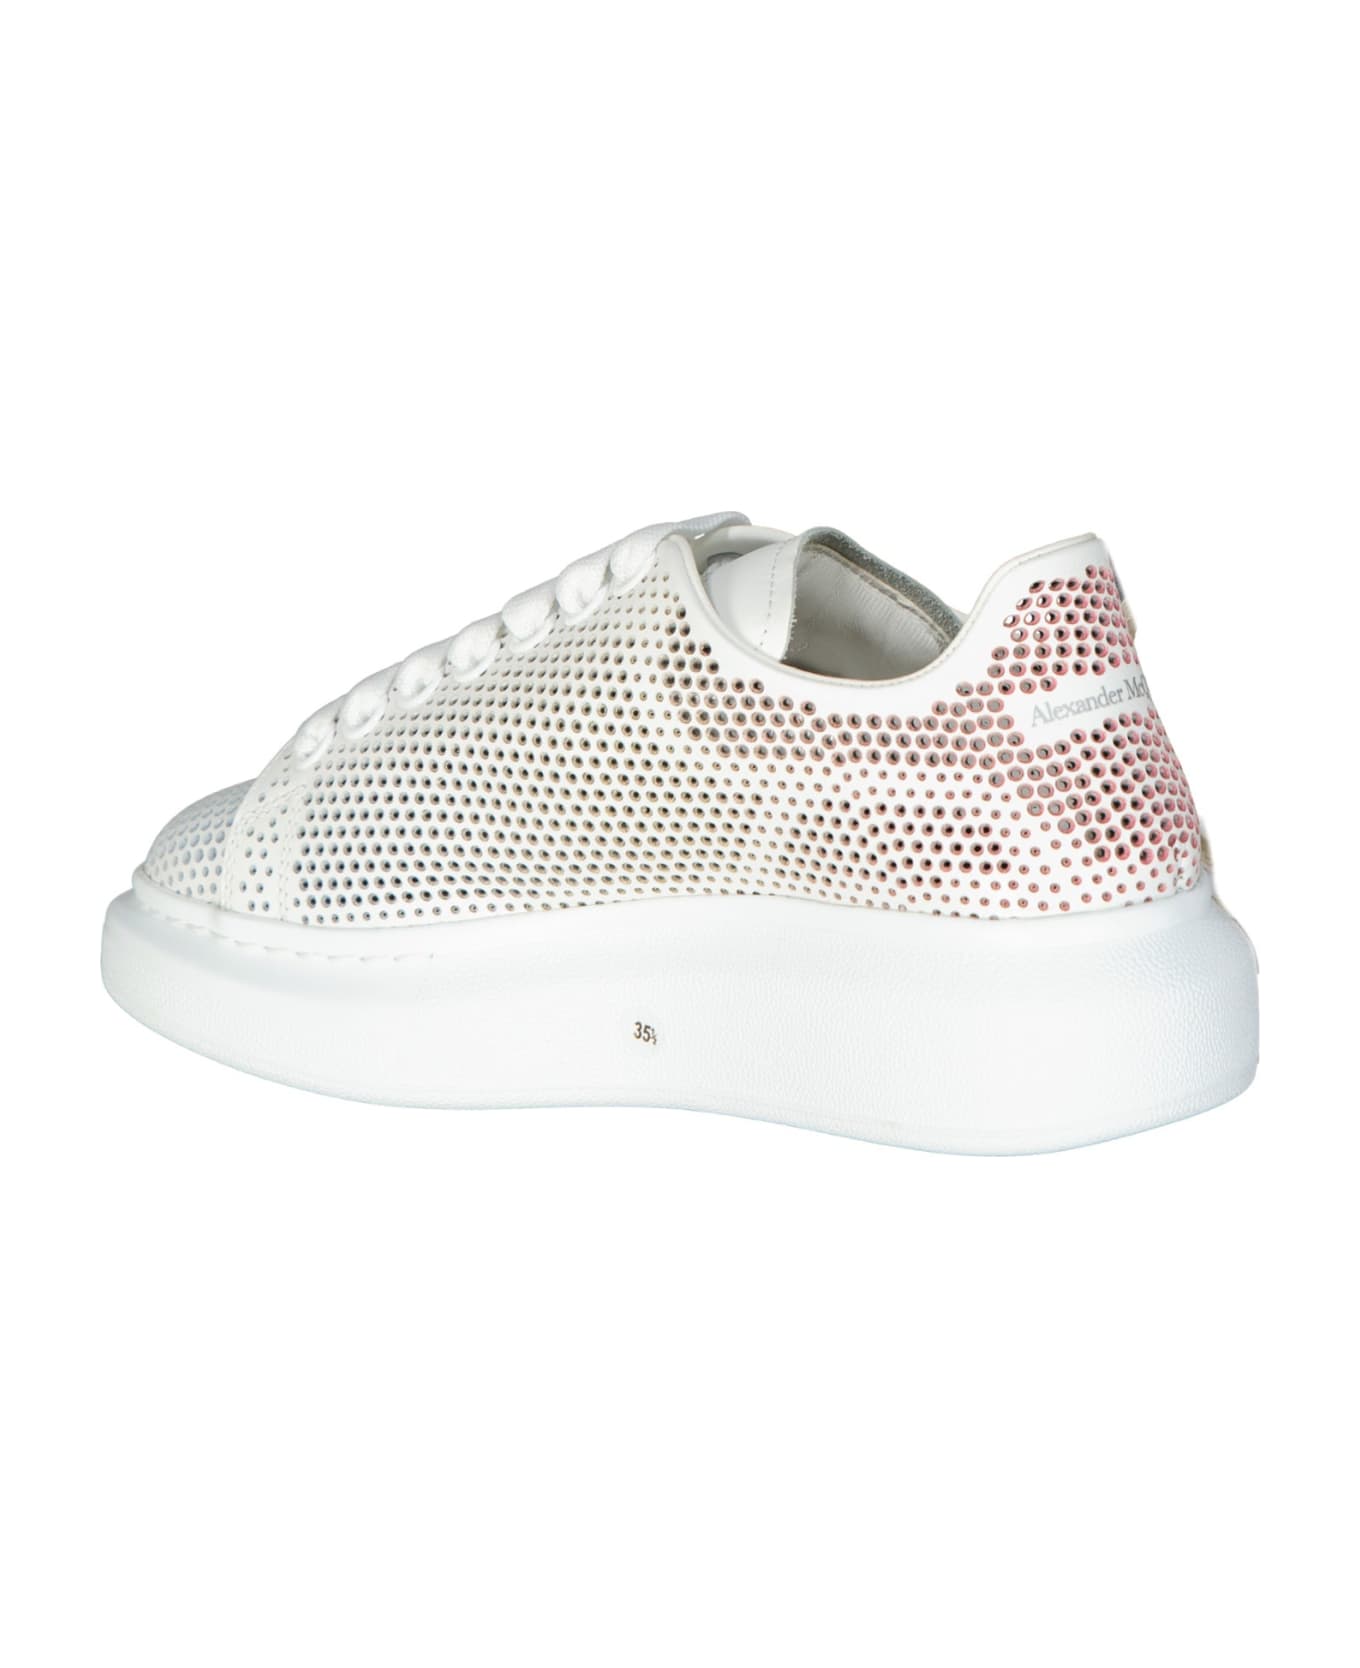 Alexander McQueen Oversized Dotted Cut-out Sneakers - White スニーカー